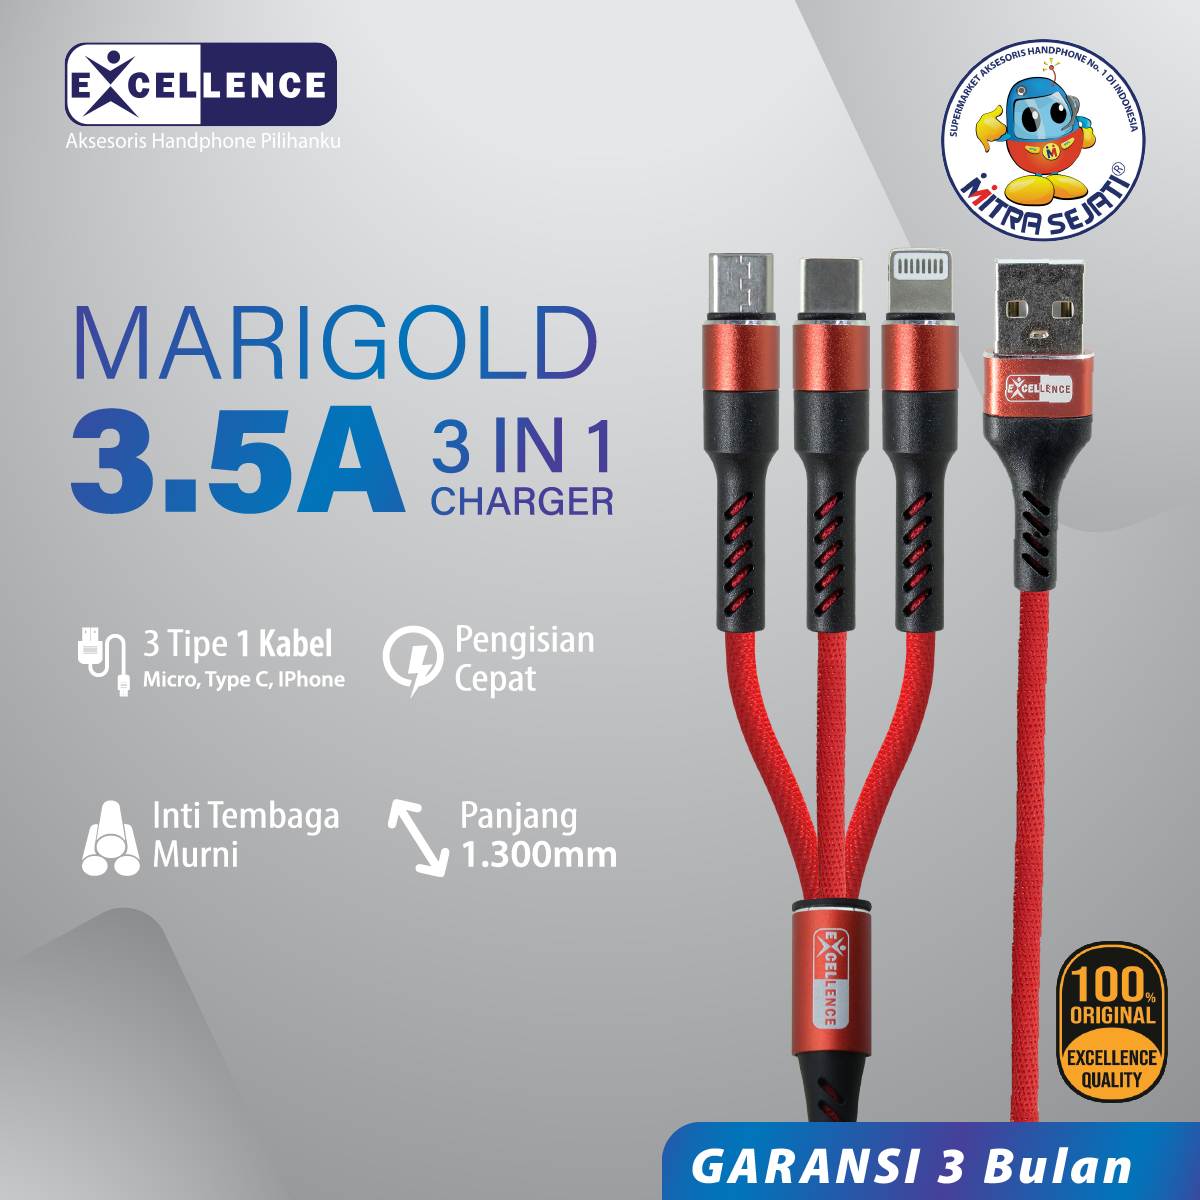 Kabel Data 3in1 for Micro USB Type C dan Lightning Fast Charging Original Excellence Marigold